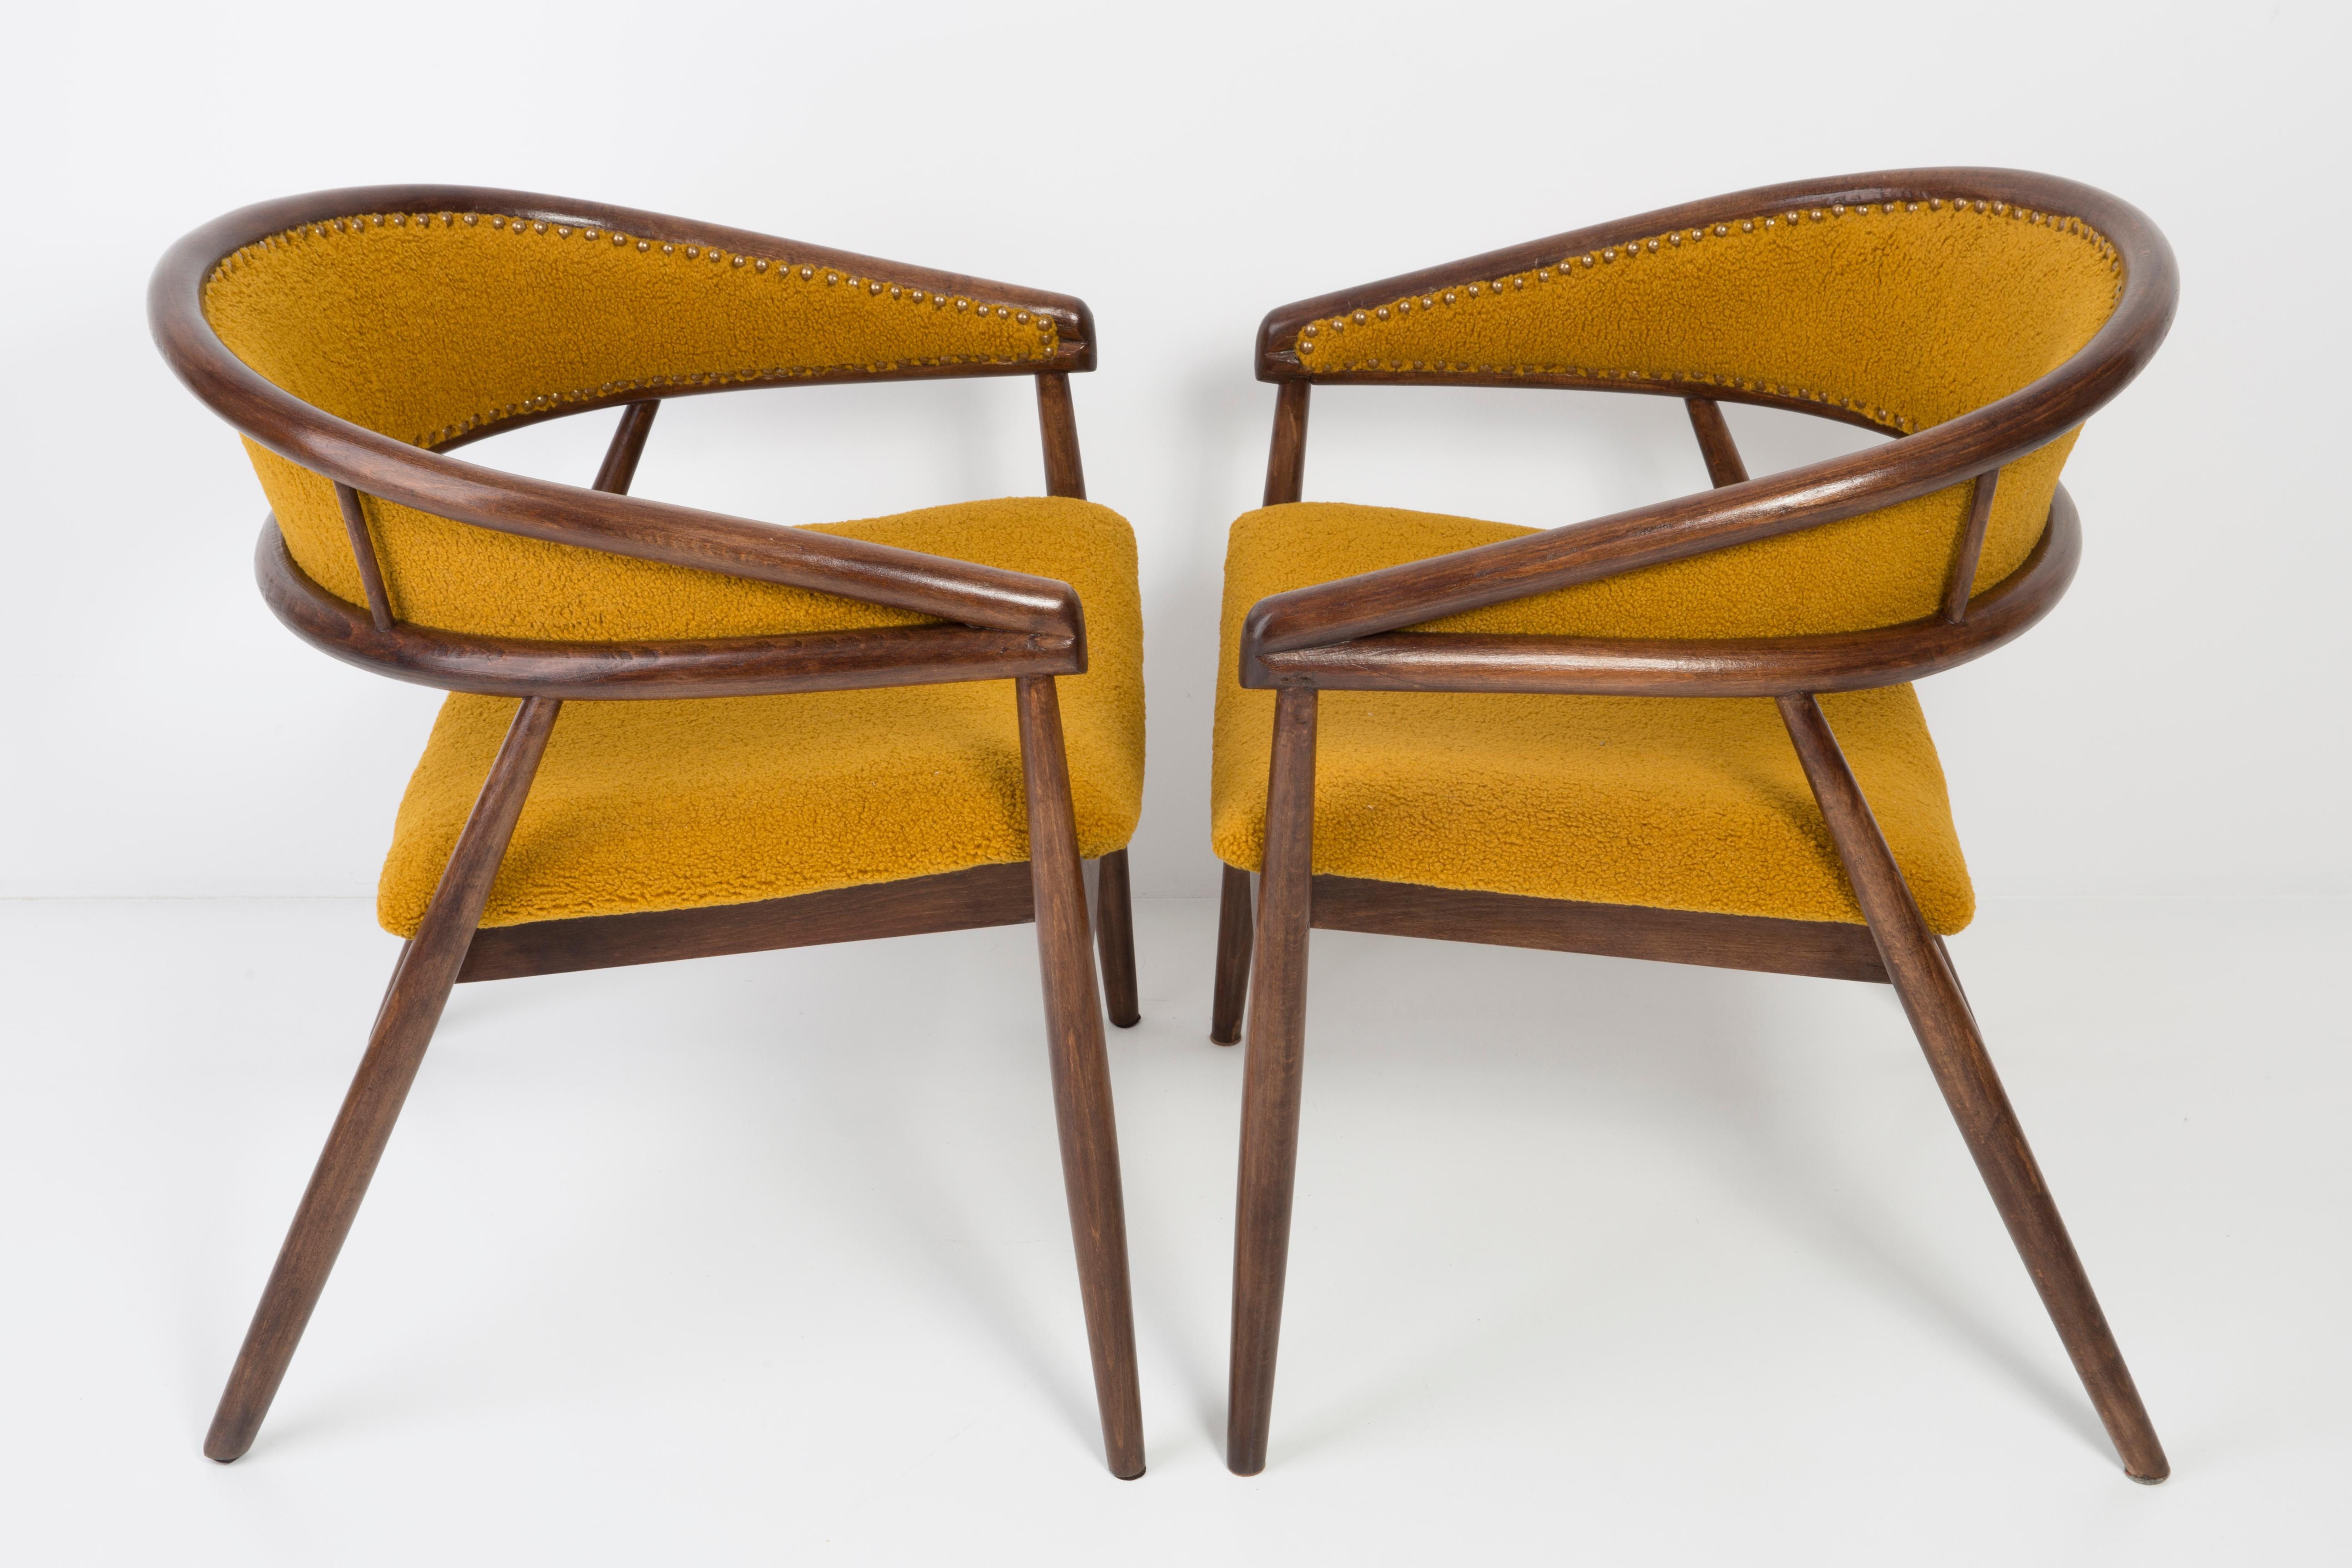 Polish Set of James Mont Bent Beech Armchairs and Table, Yellow Ochra Boucle, 1960s For Sale